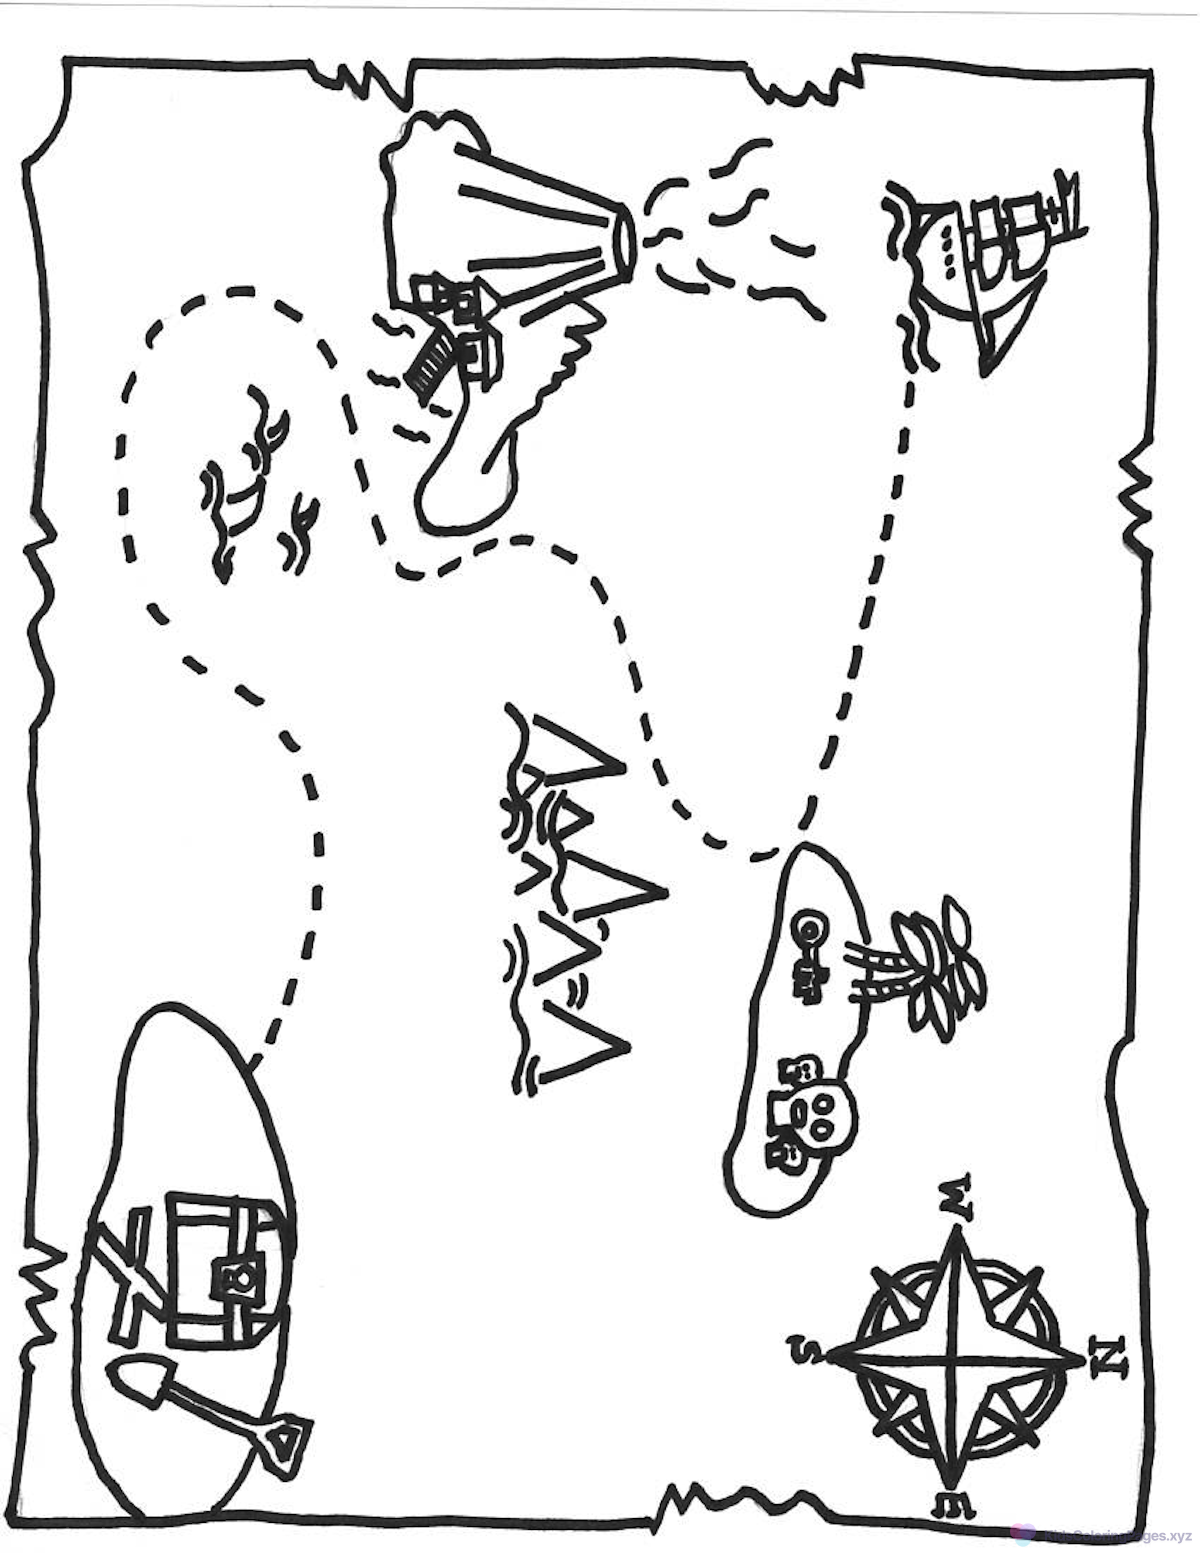 Pirate Treasure Map coloring page for printing